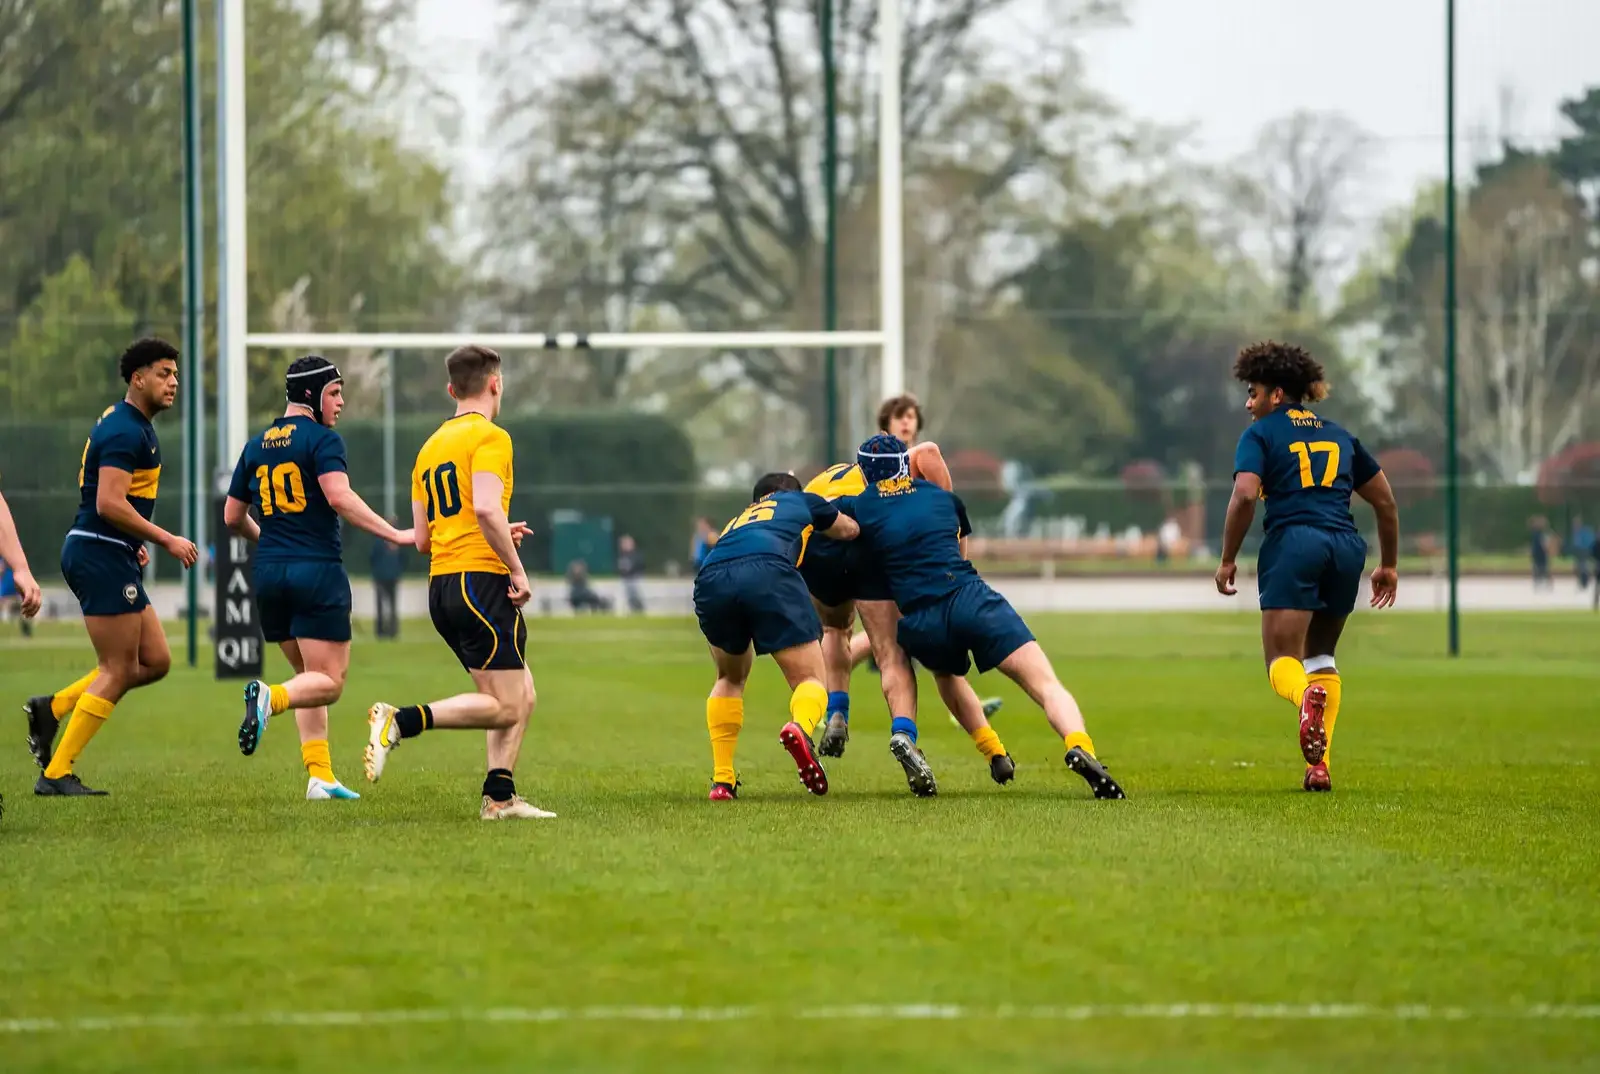 QE pupils playing rugby